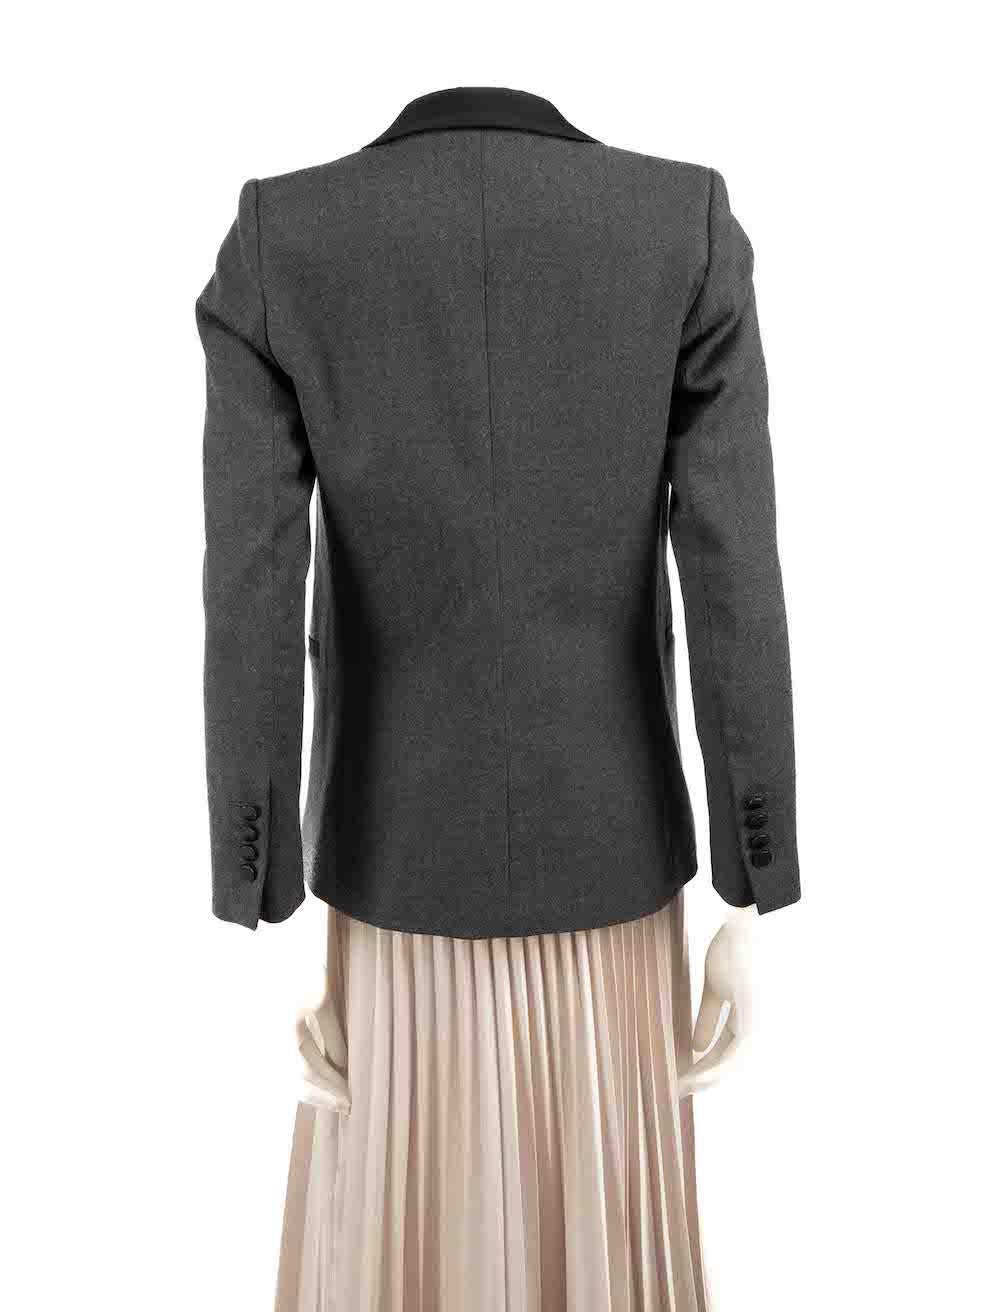 Sandro Grey Wool Tailored Blazer Jacket Size S In Excellent Condition For Sale In London, GB